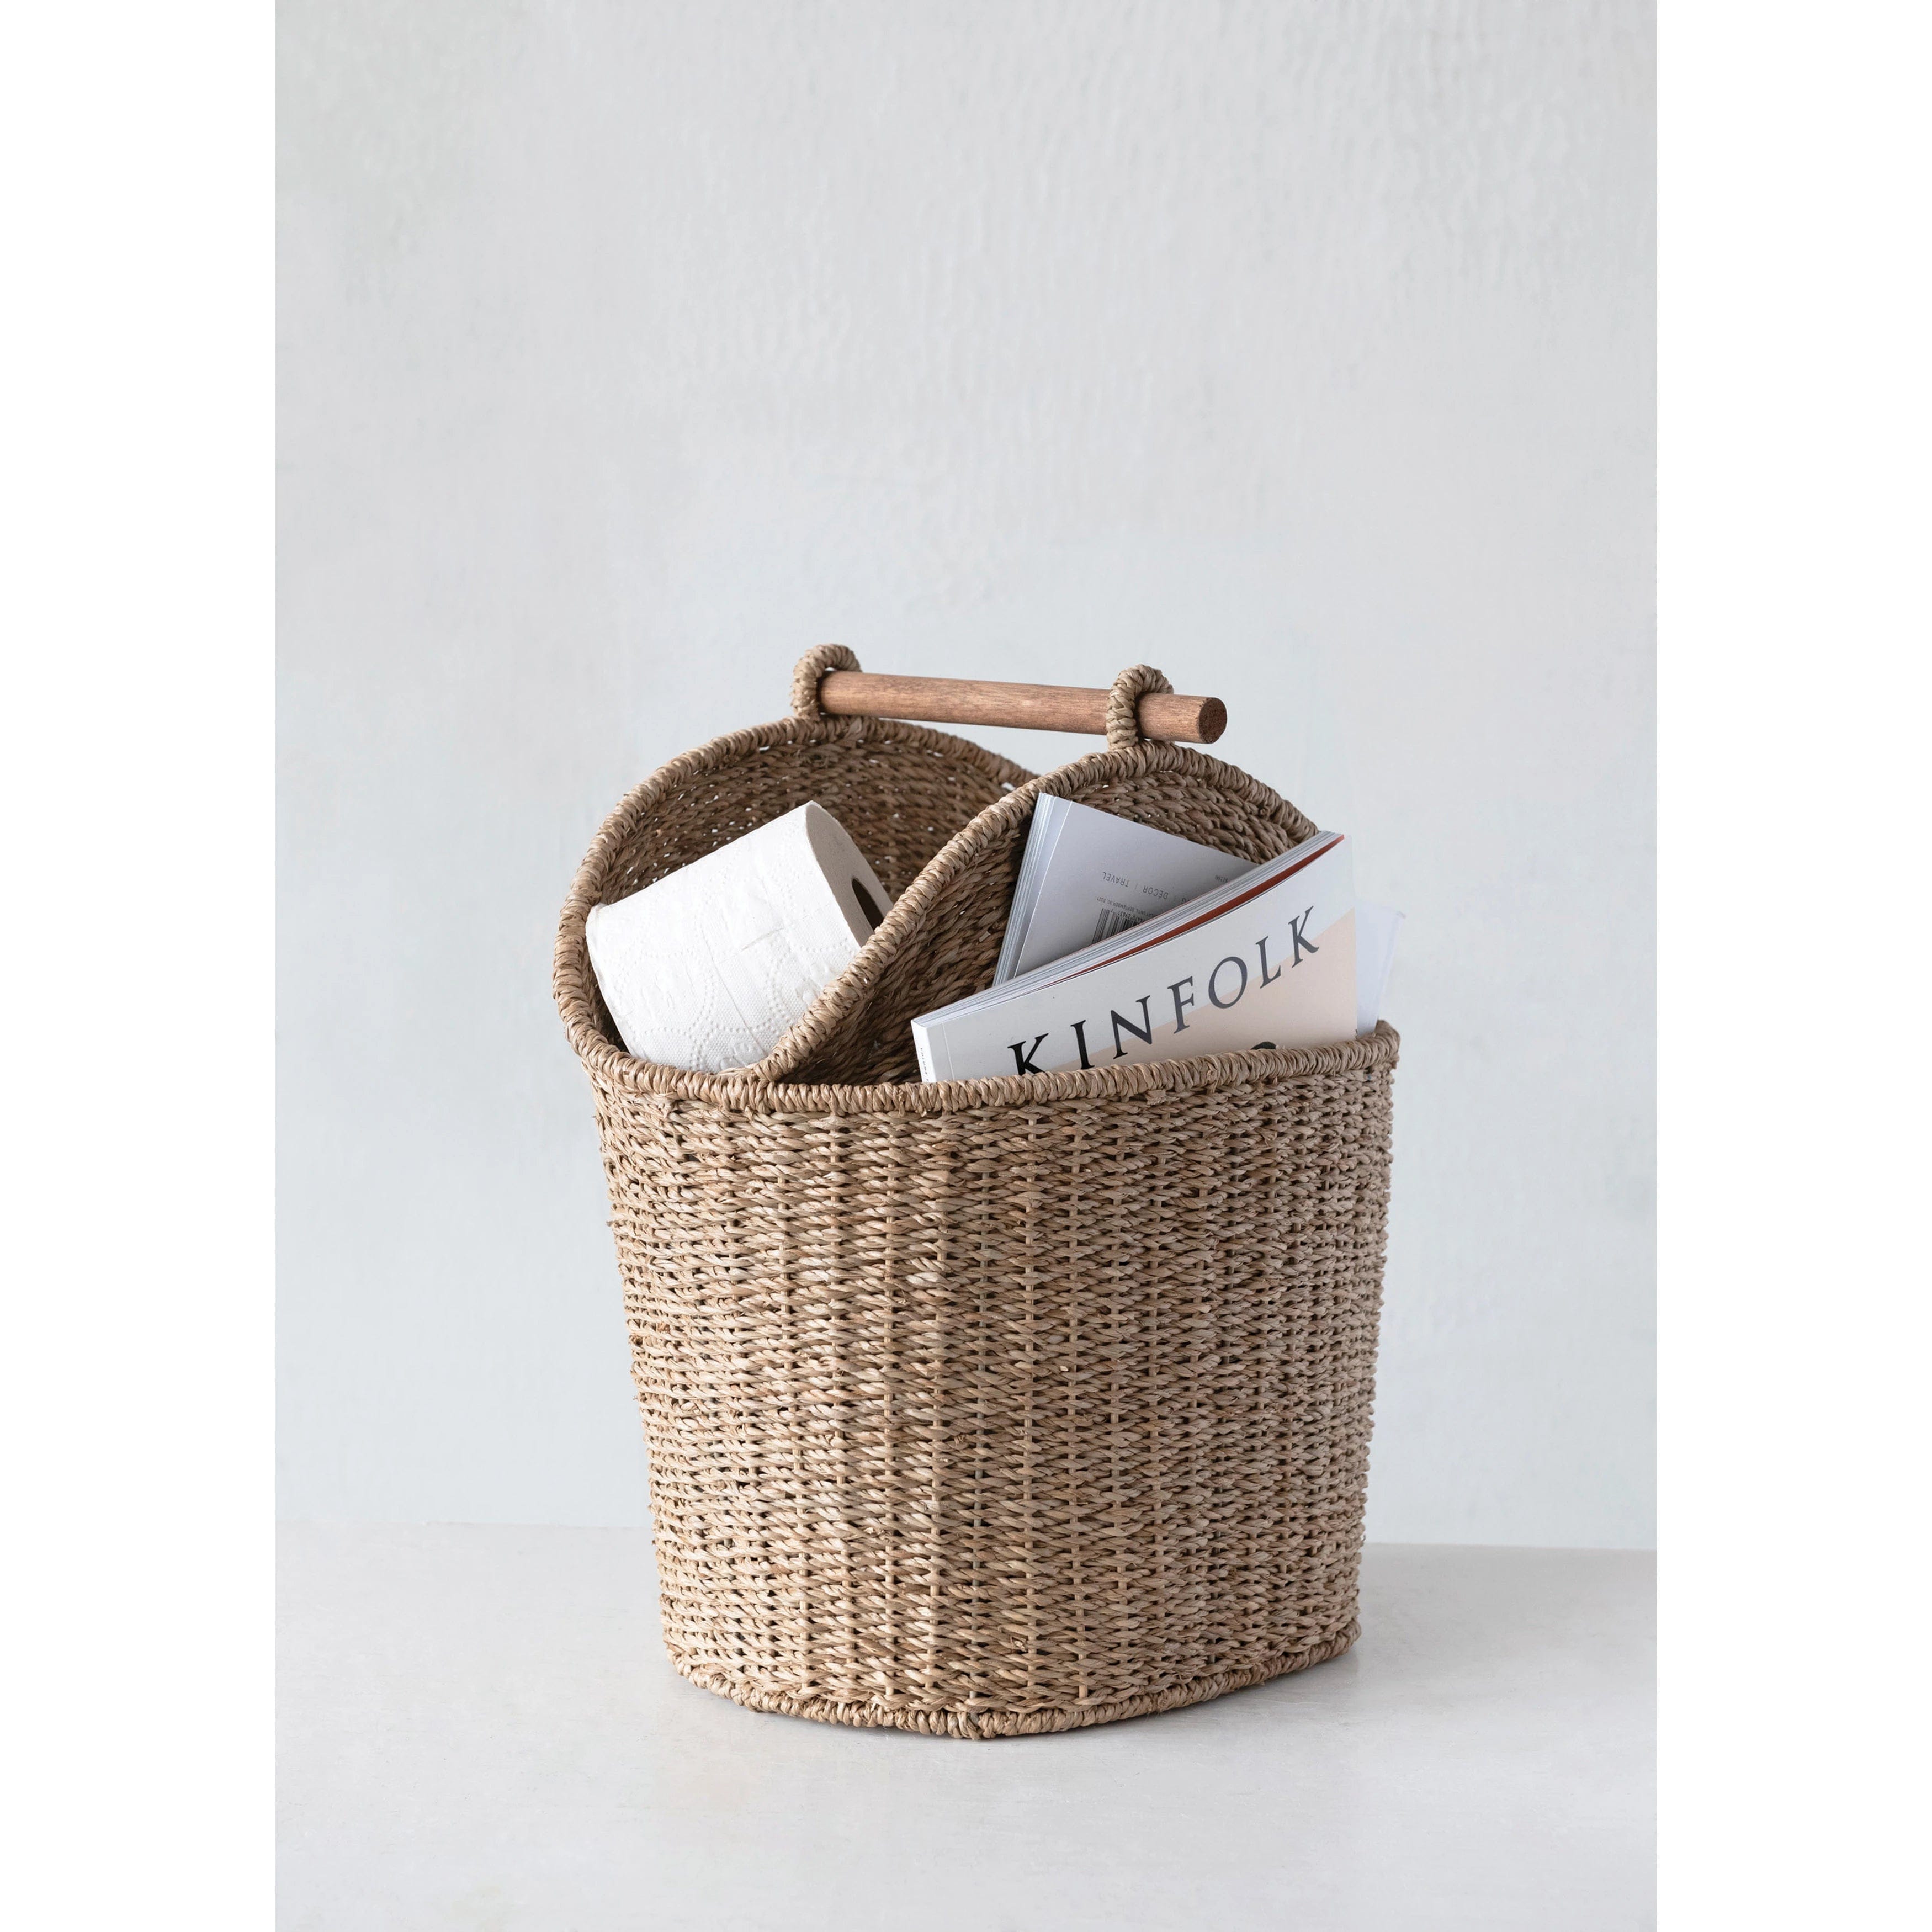 Small Childs Wicker Basket With Handle - The Basket Company